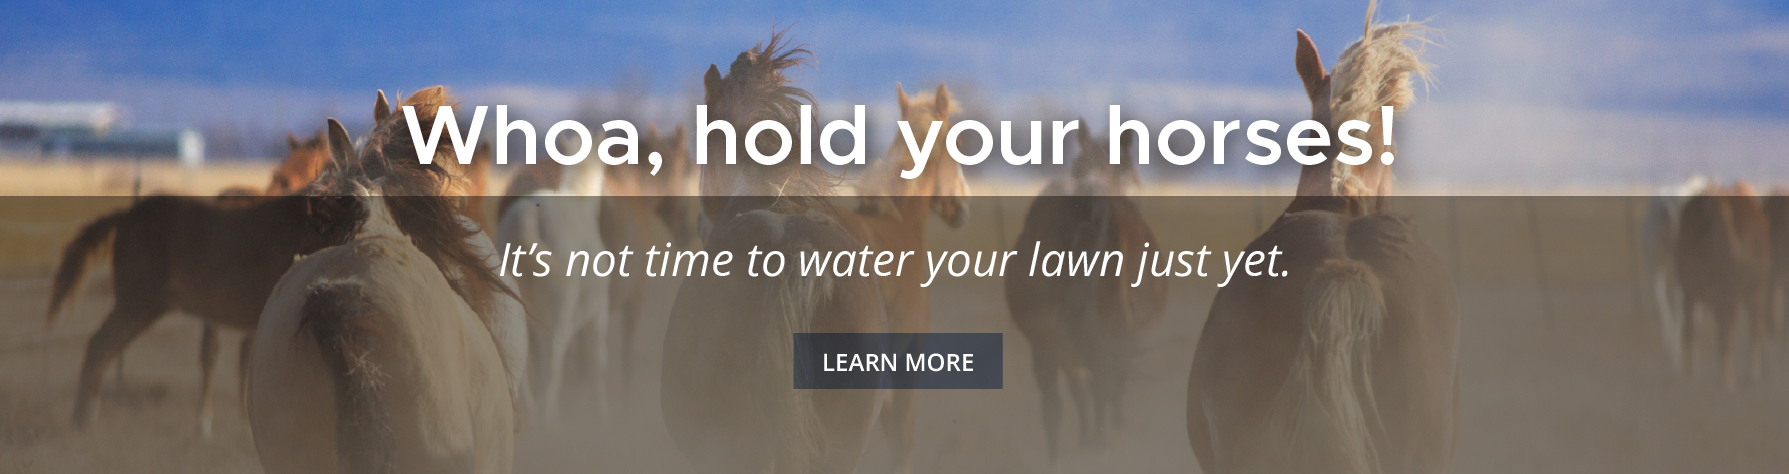 Wait to water horses